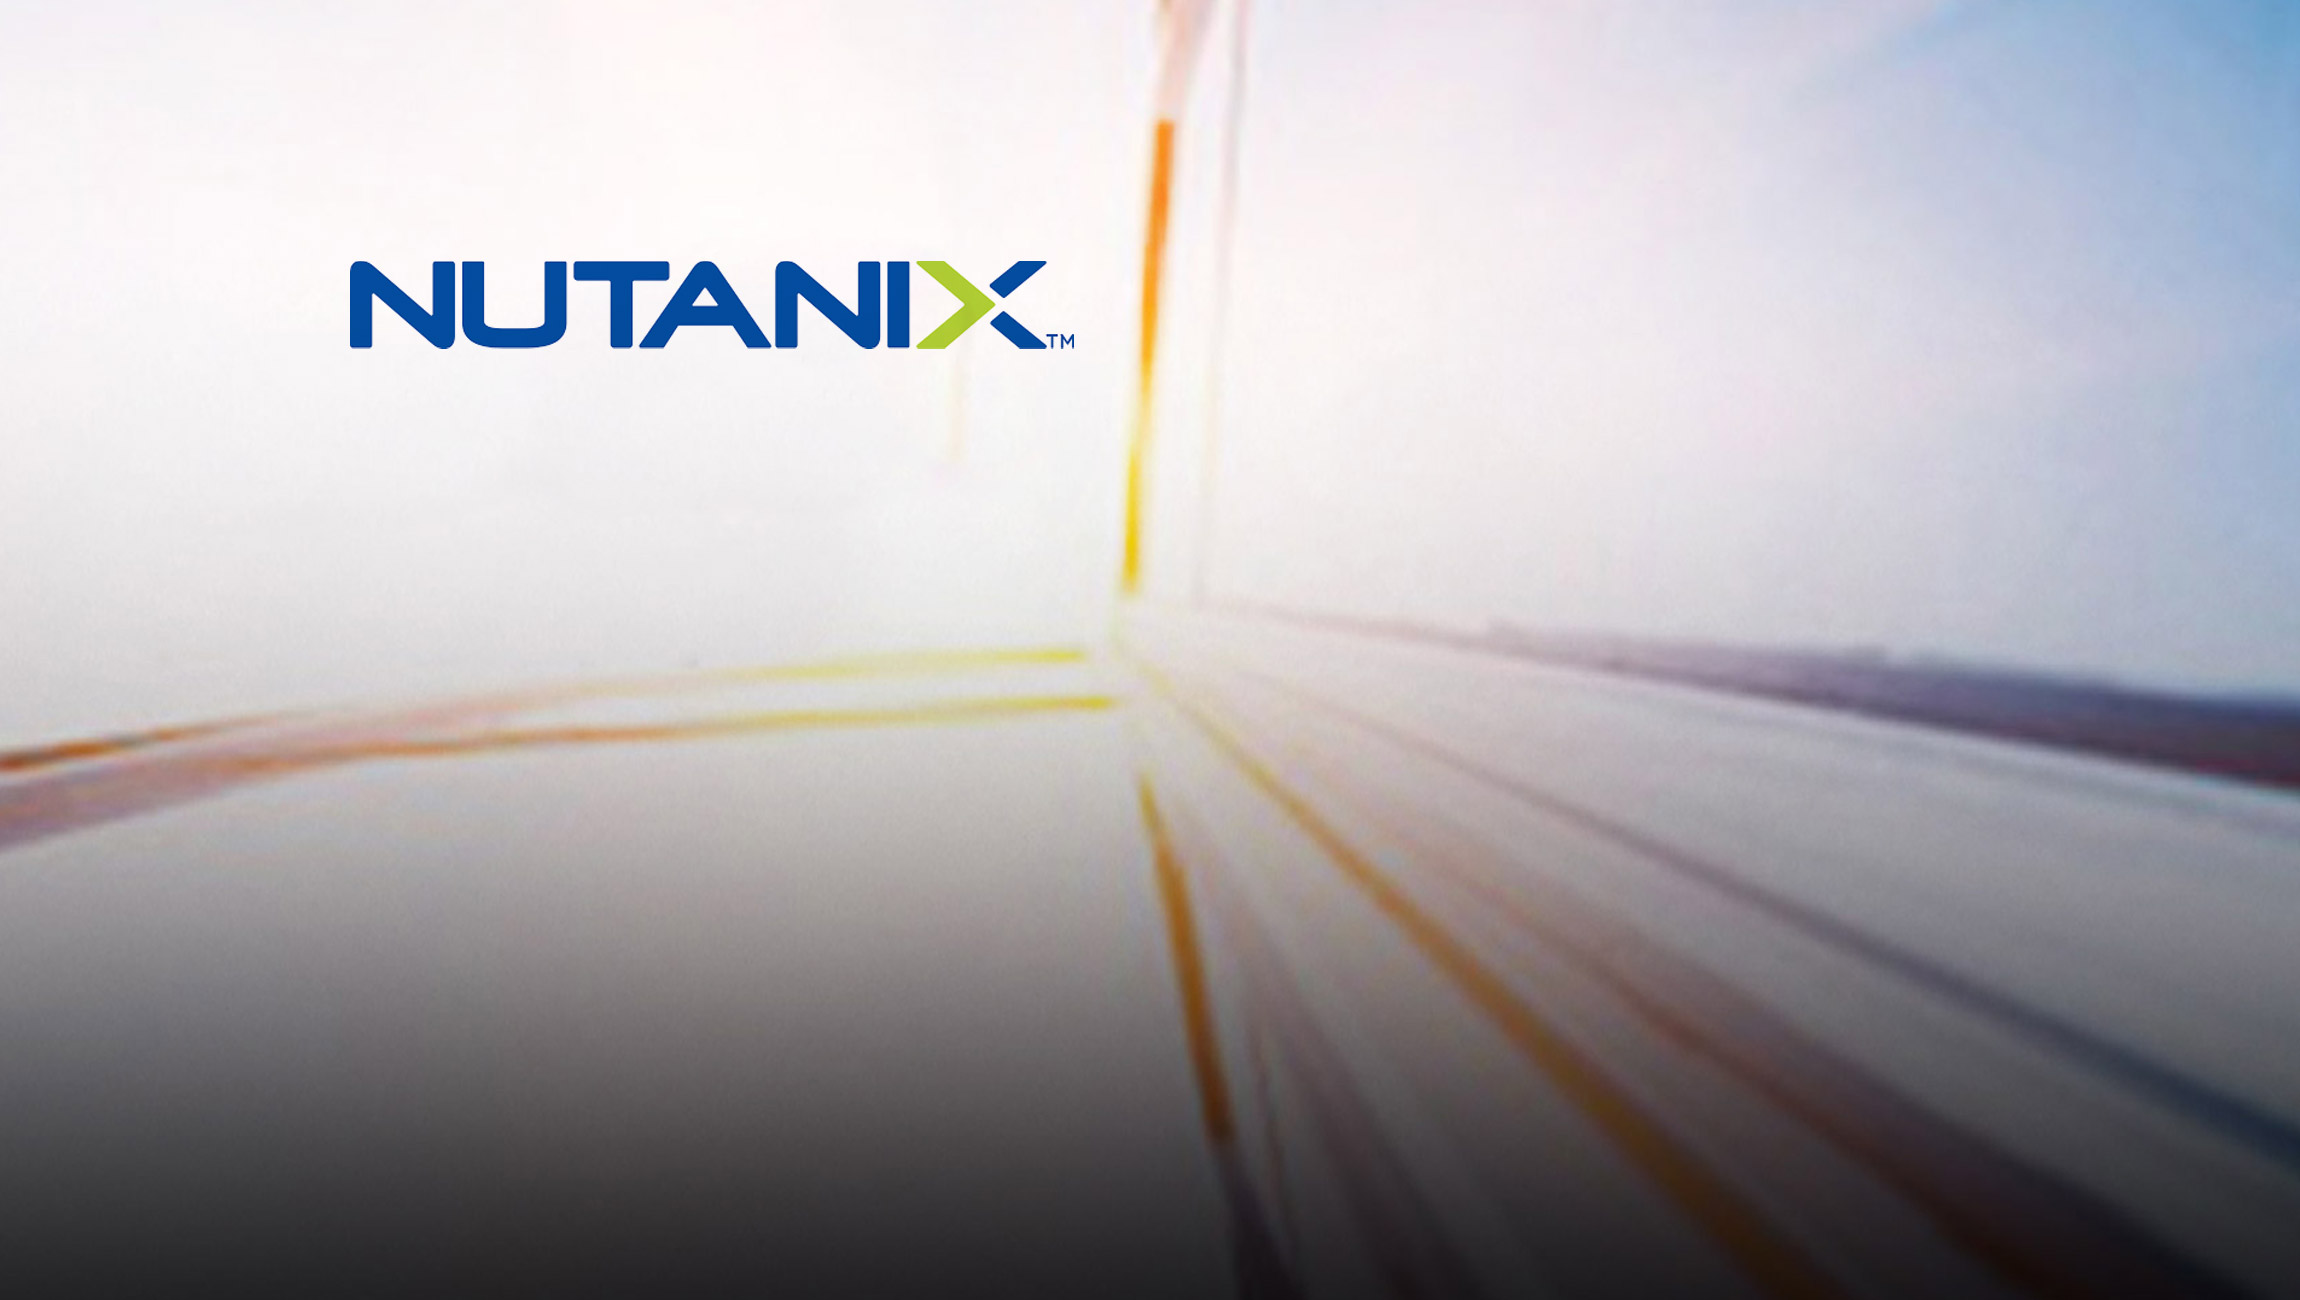 Nutanix Launches New Product Portfolio to Ease Path to Hybrid Multicloud